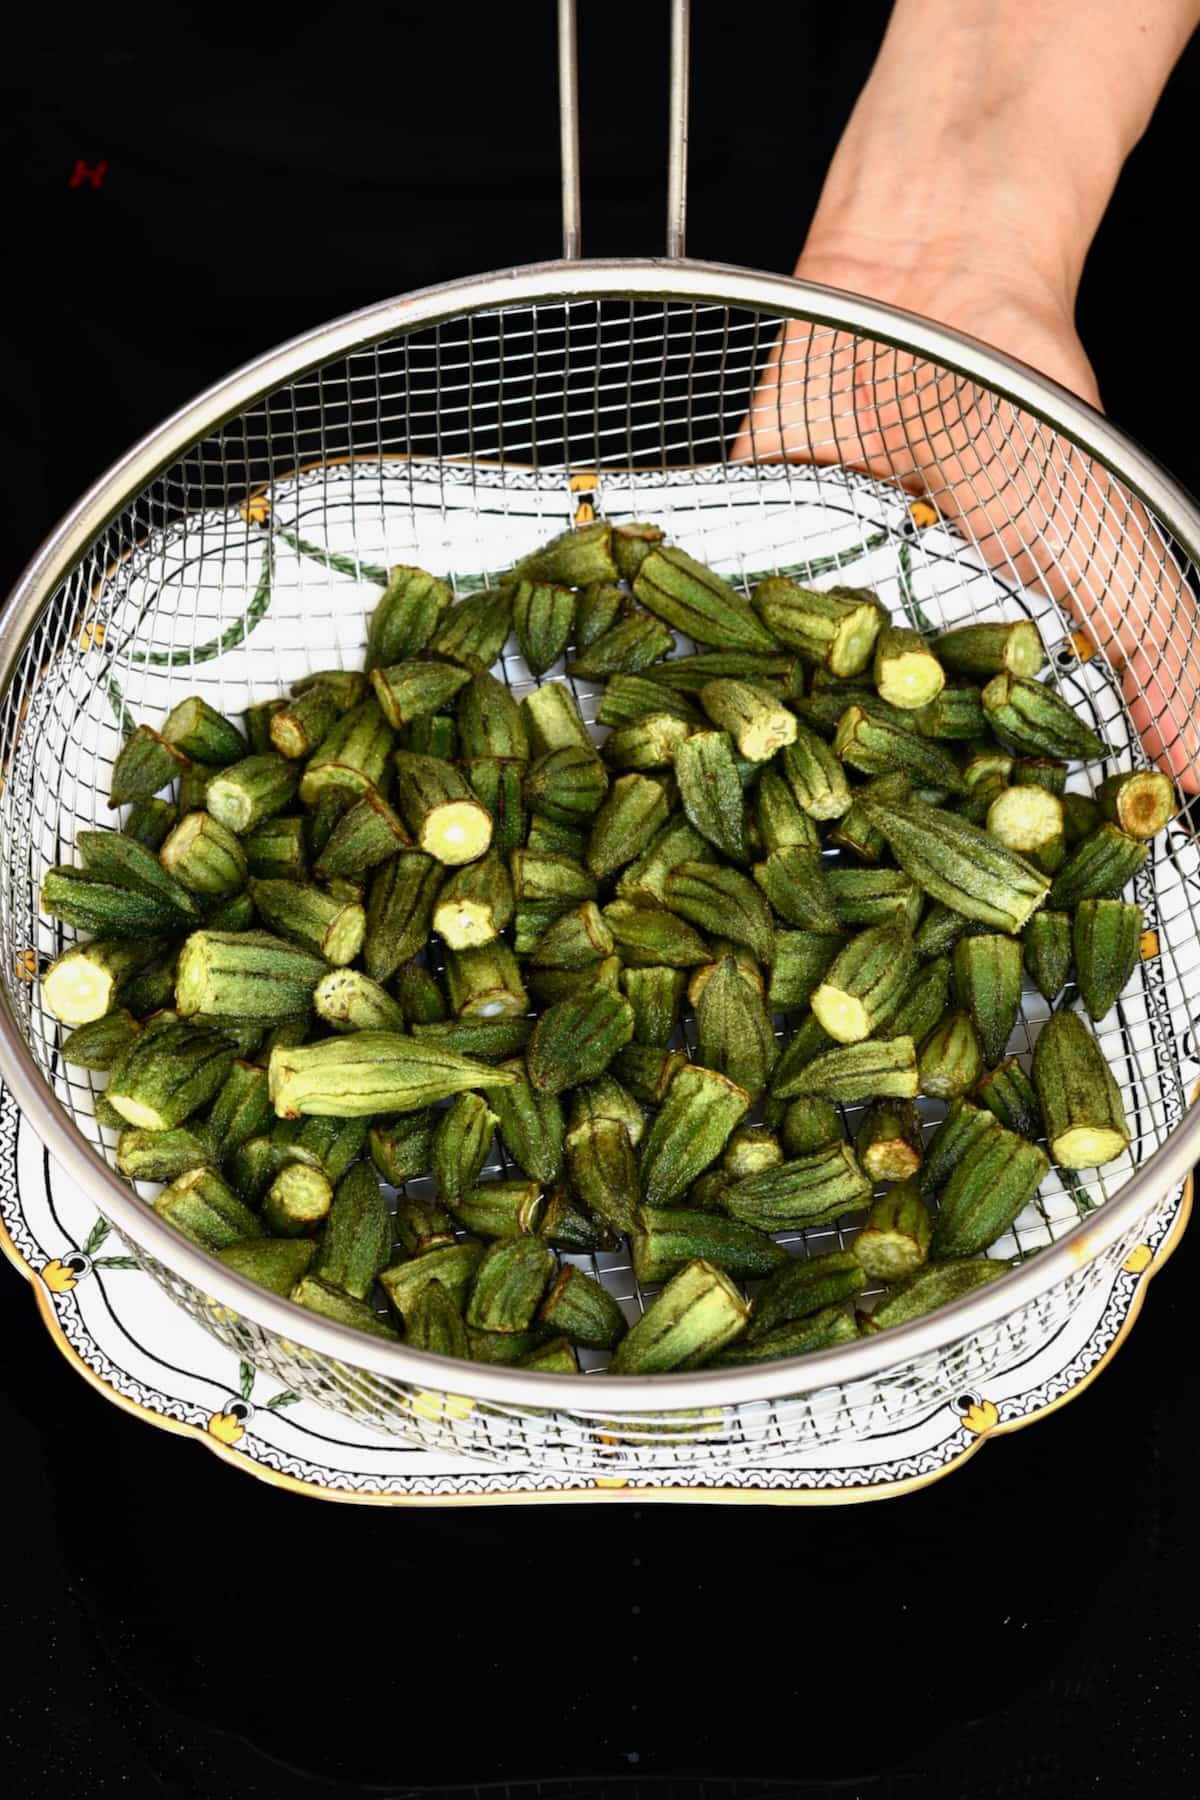 Cooked okra in a bowl